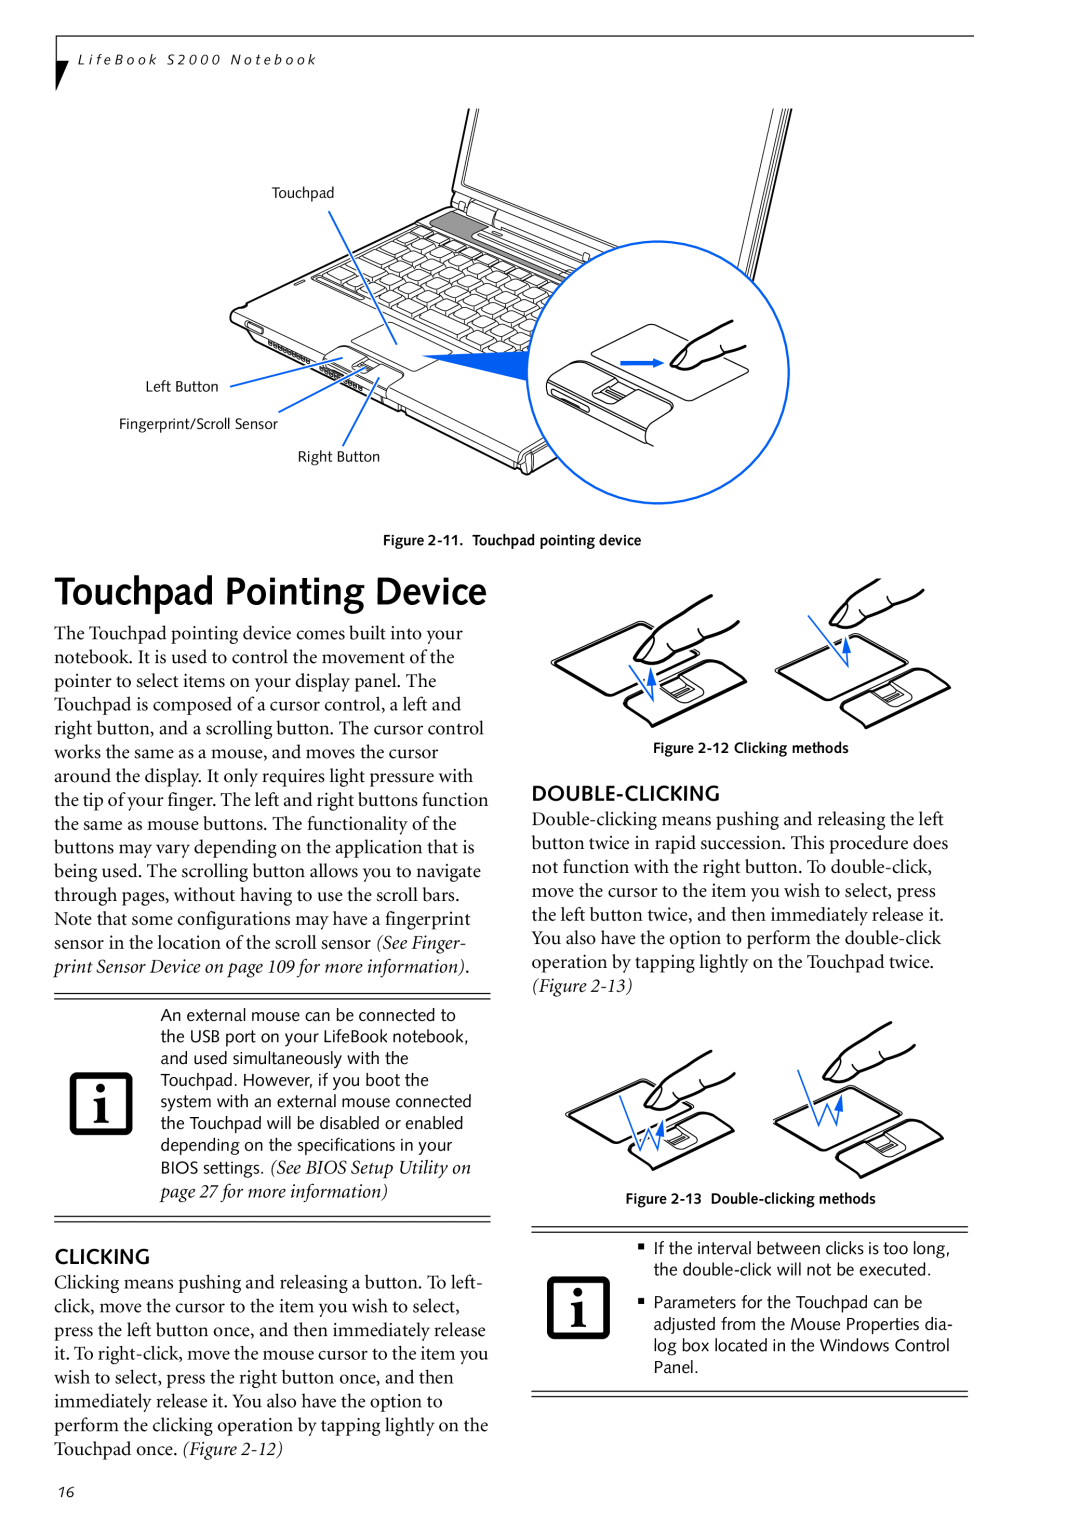 Fujitsu Siemens Computers S2210 manual Touchpad Pointing Device, Double-Clicking 